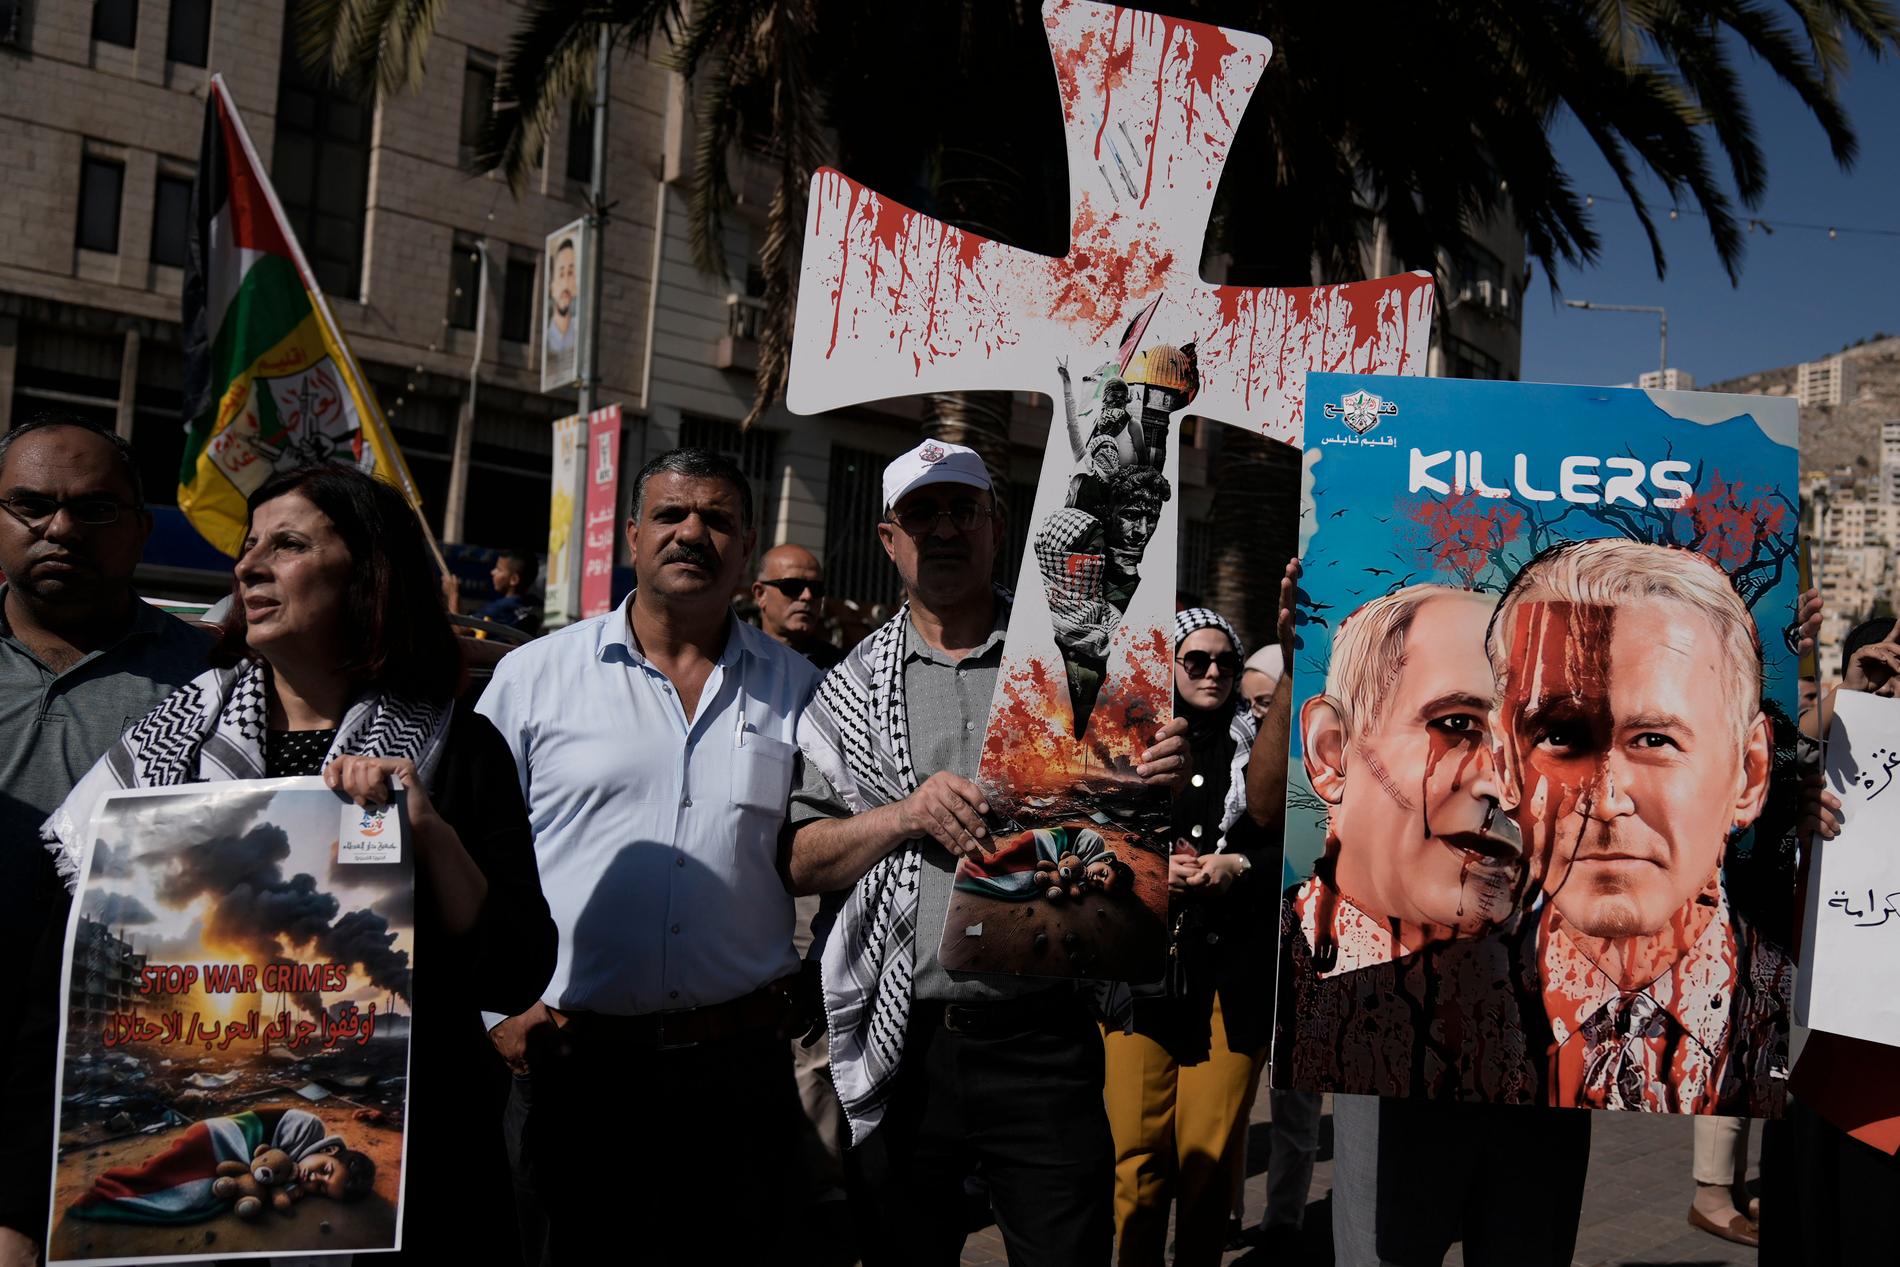 West Bank: Protesters in the West Bank called Biden and Netanyahu murderers on October 26. 